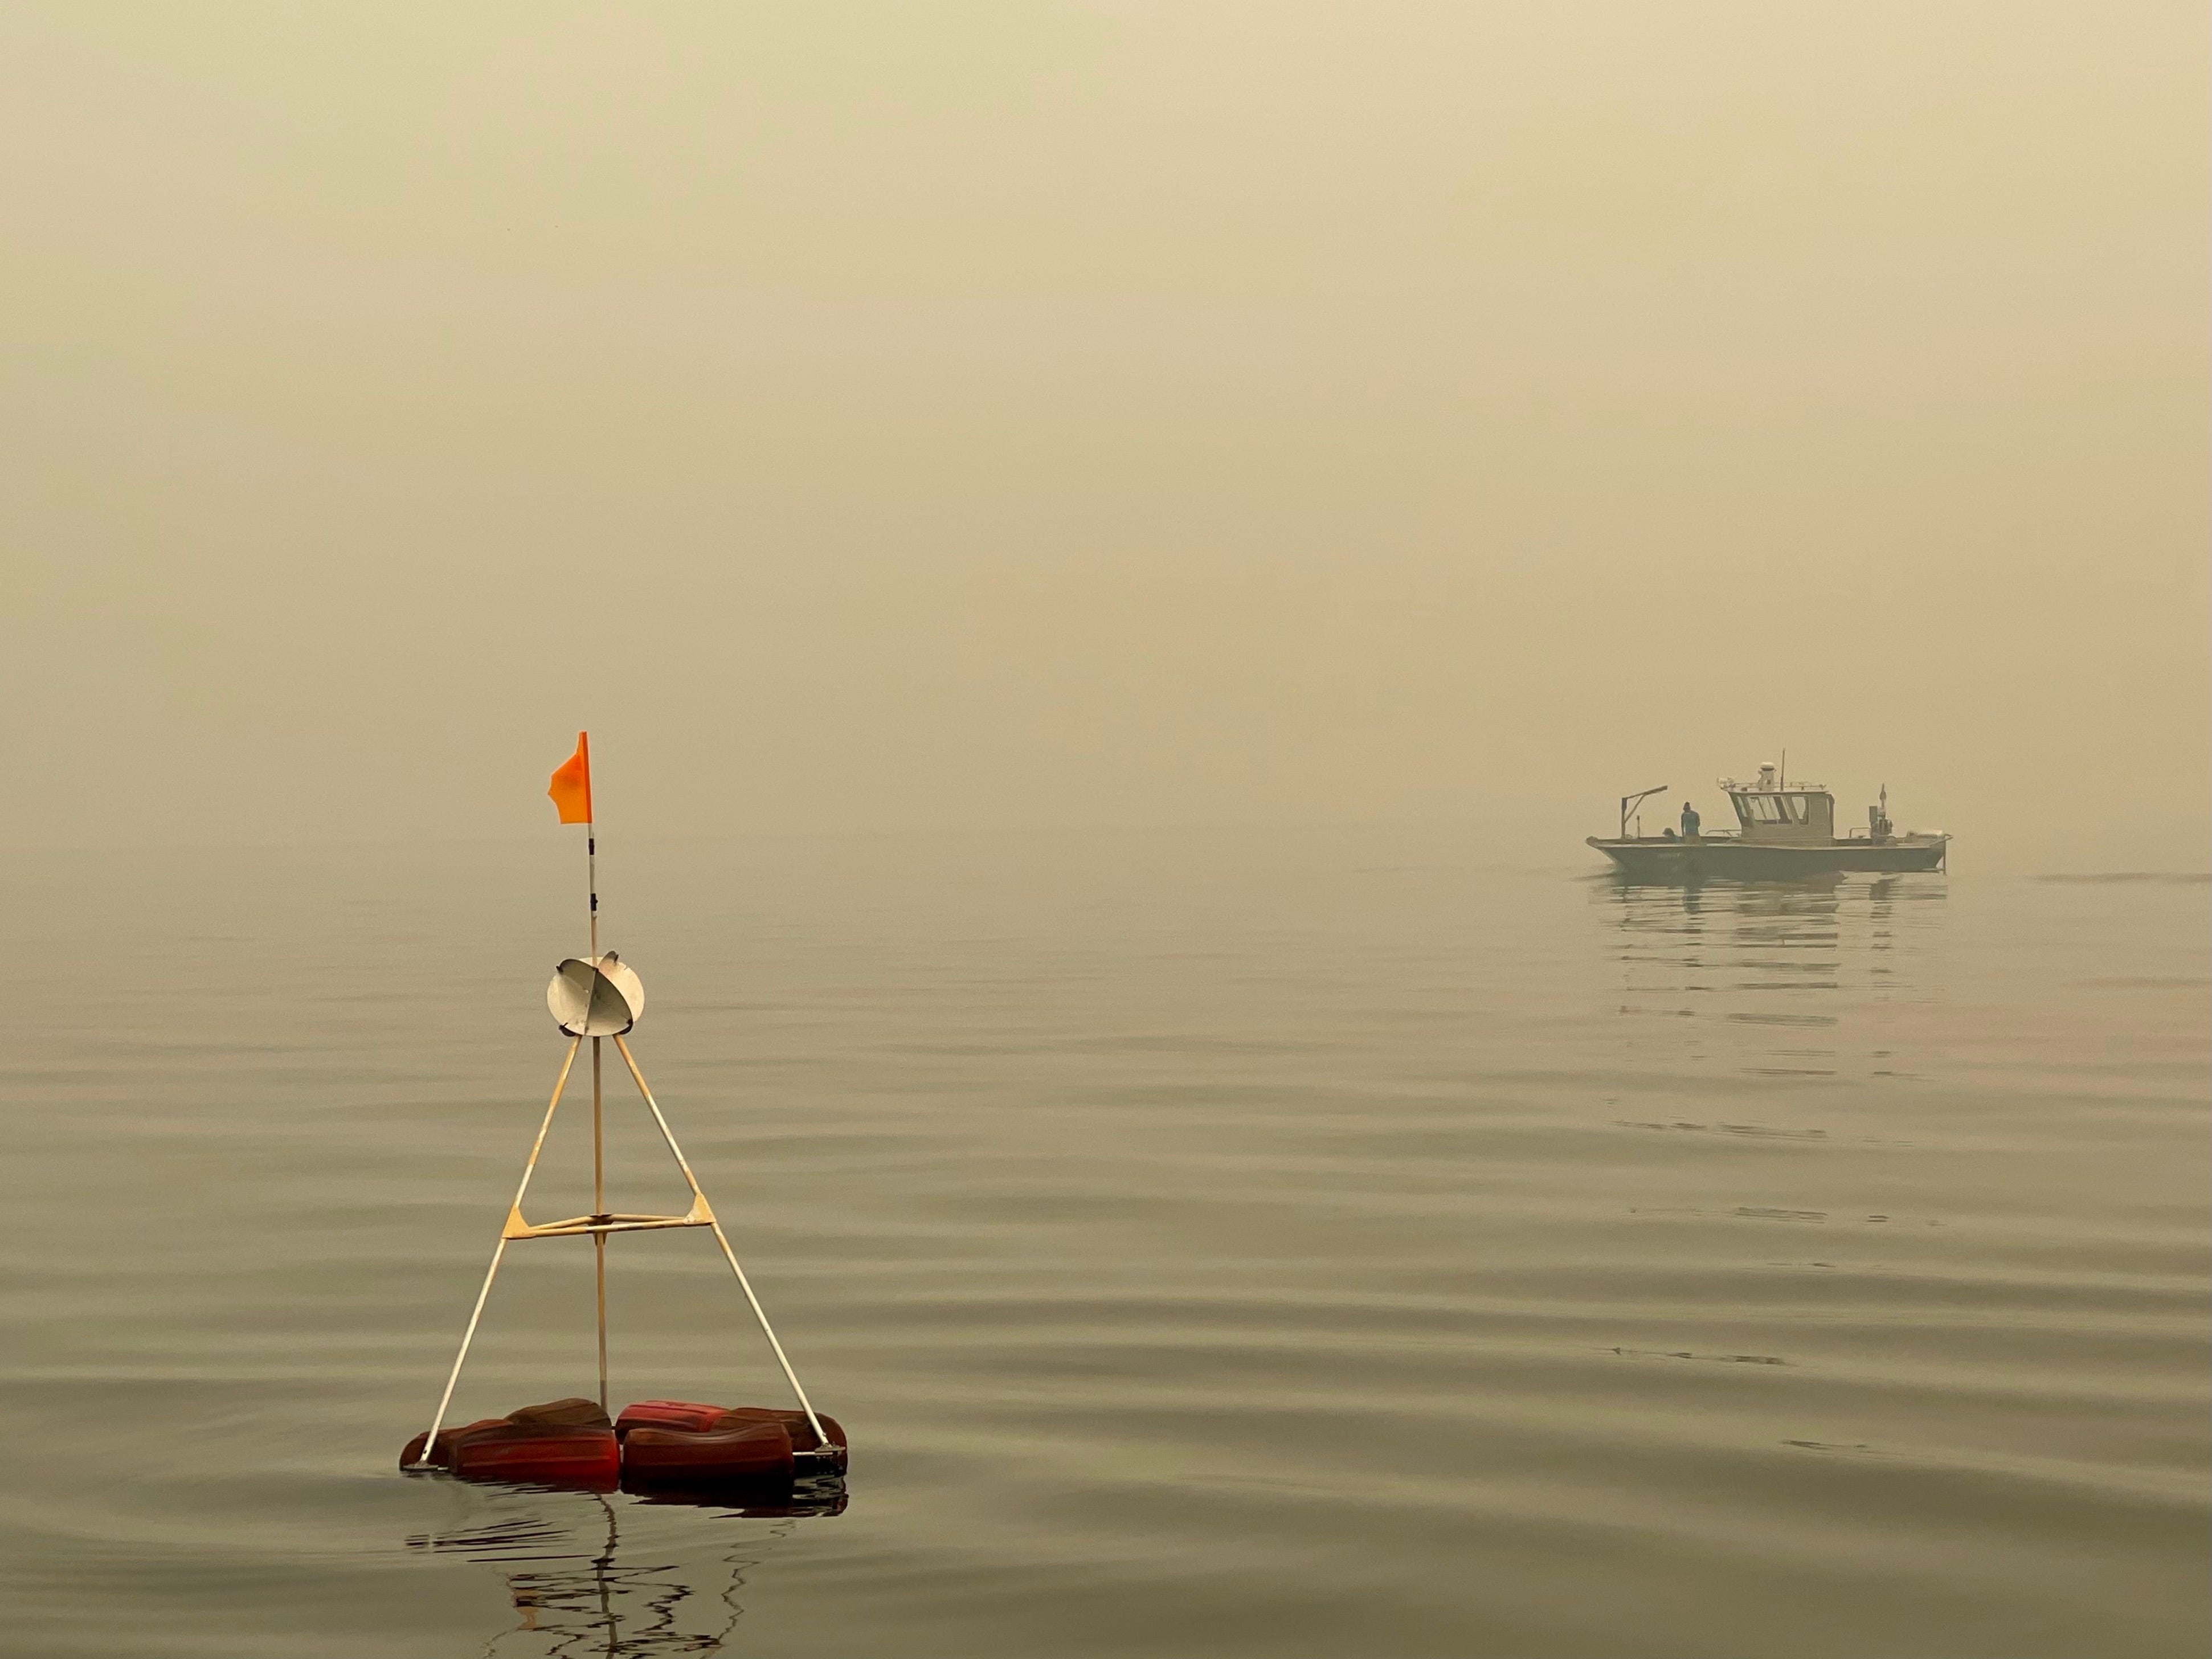 A buoy in Lake Tahoe with boat in the background under smoky skies